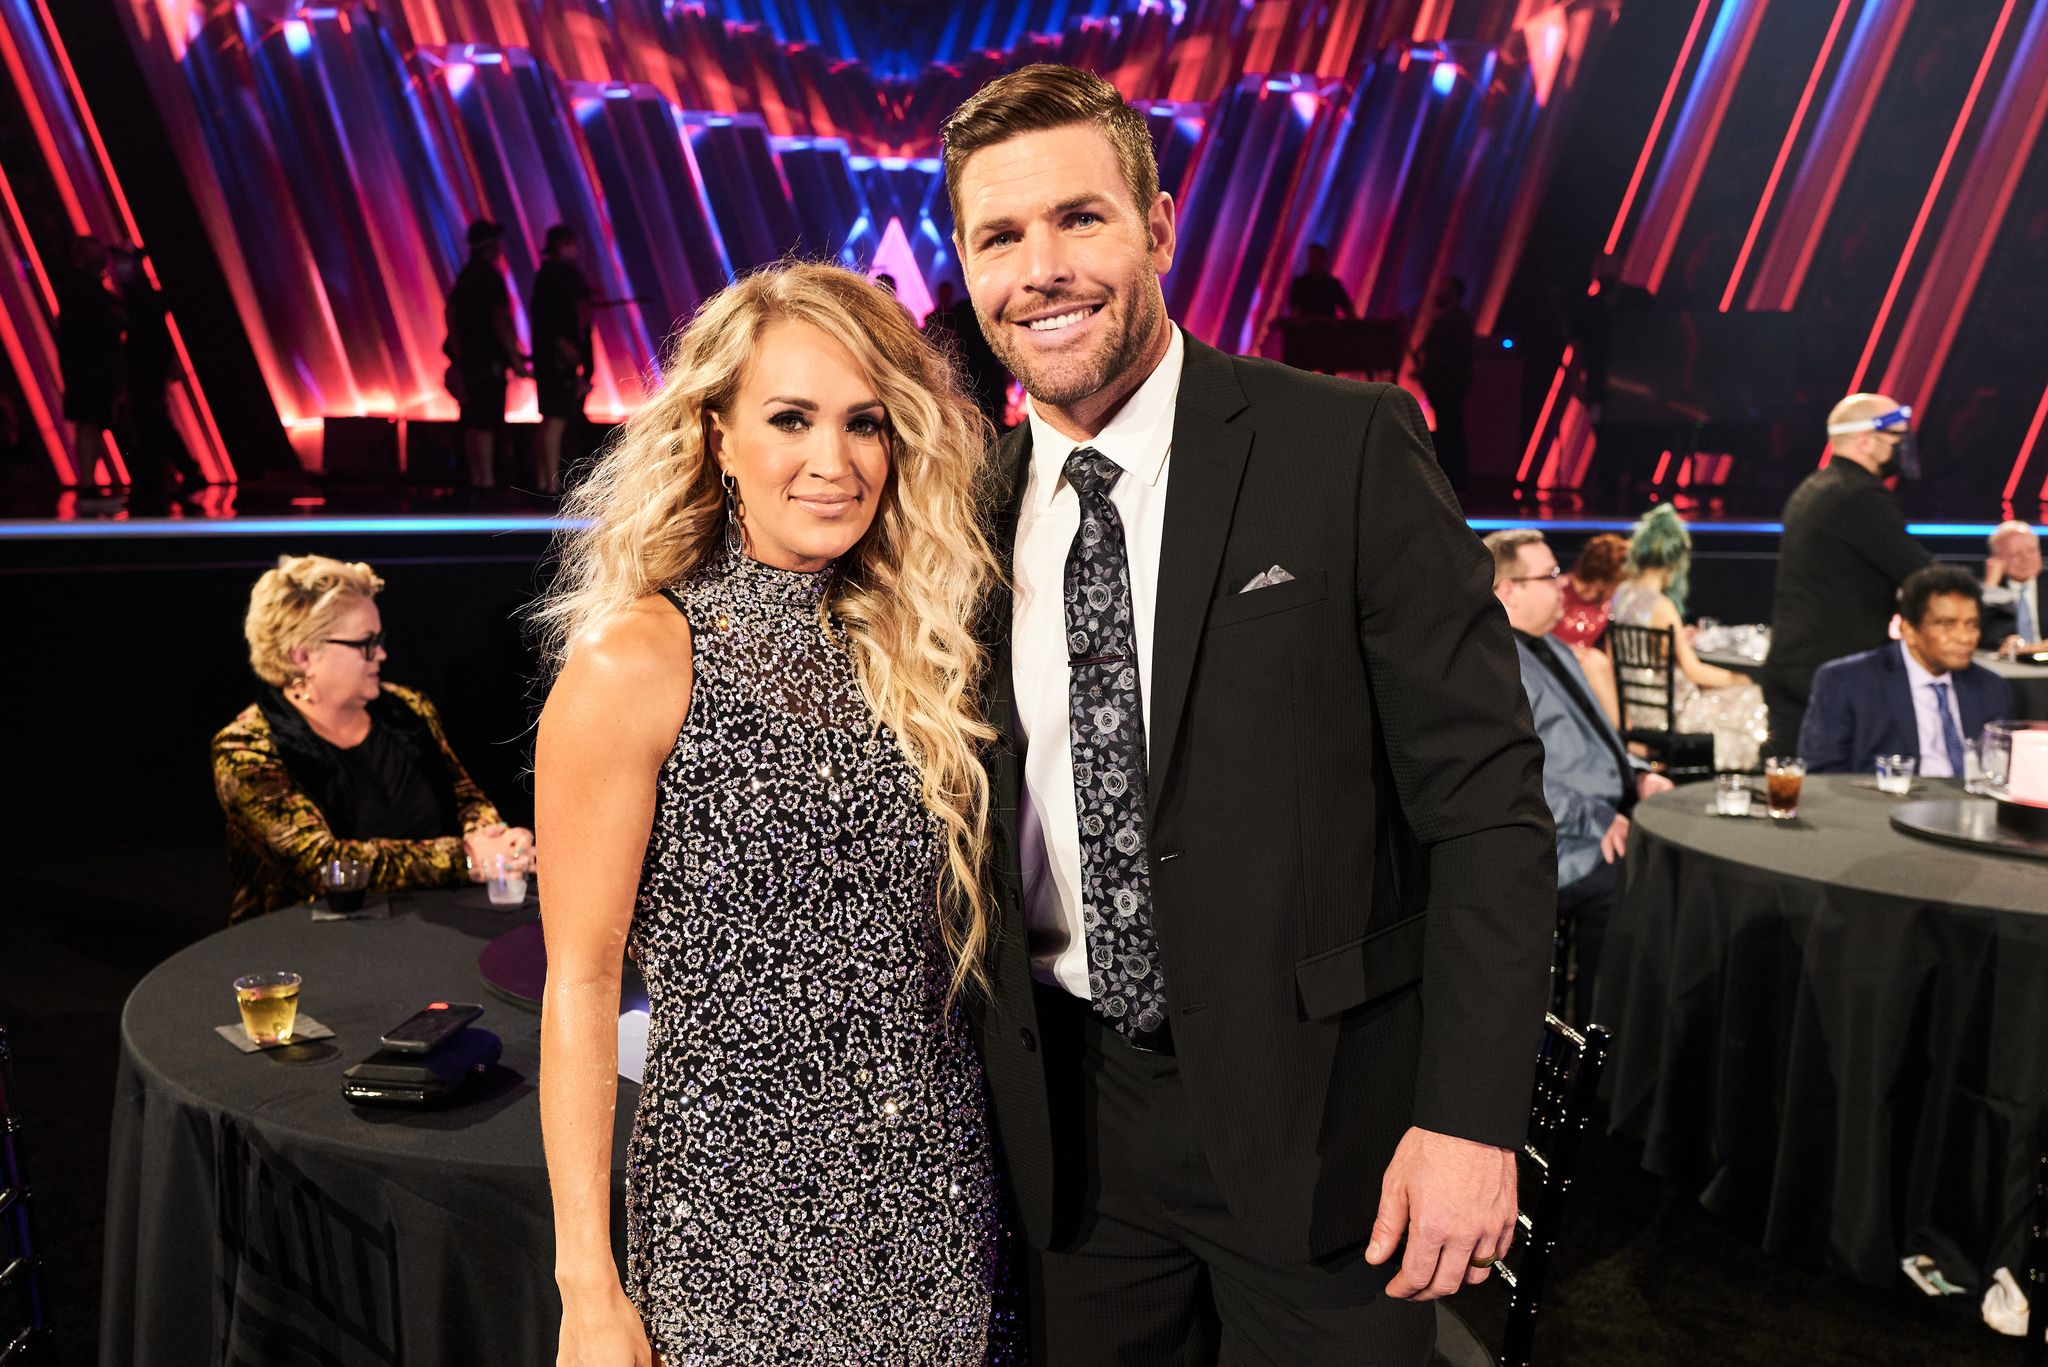 Carrie Underwood and Mike Fisher during the 54th Annual CMA Awards at Music City Center on November 11, 2020, in Nashville, Tennessee. | Source: Getty Images